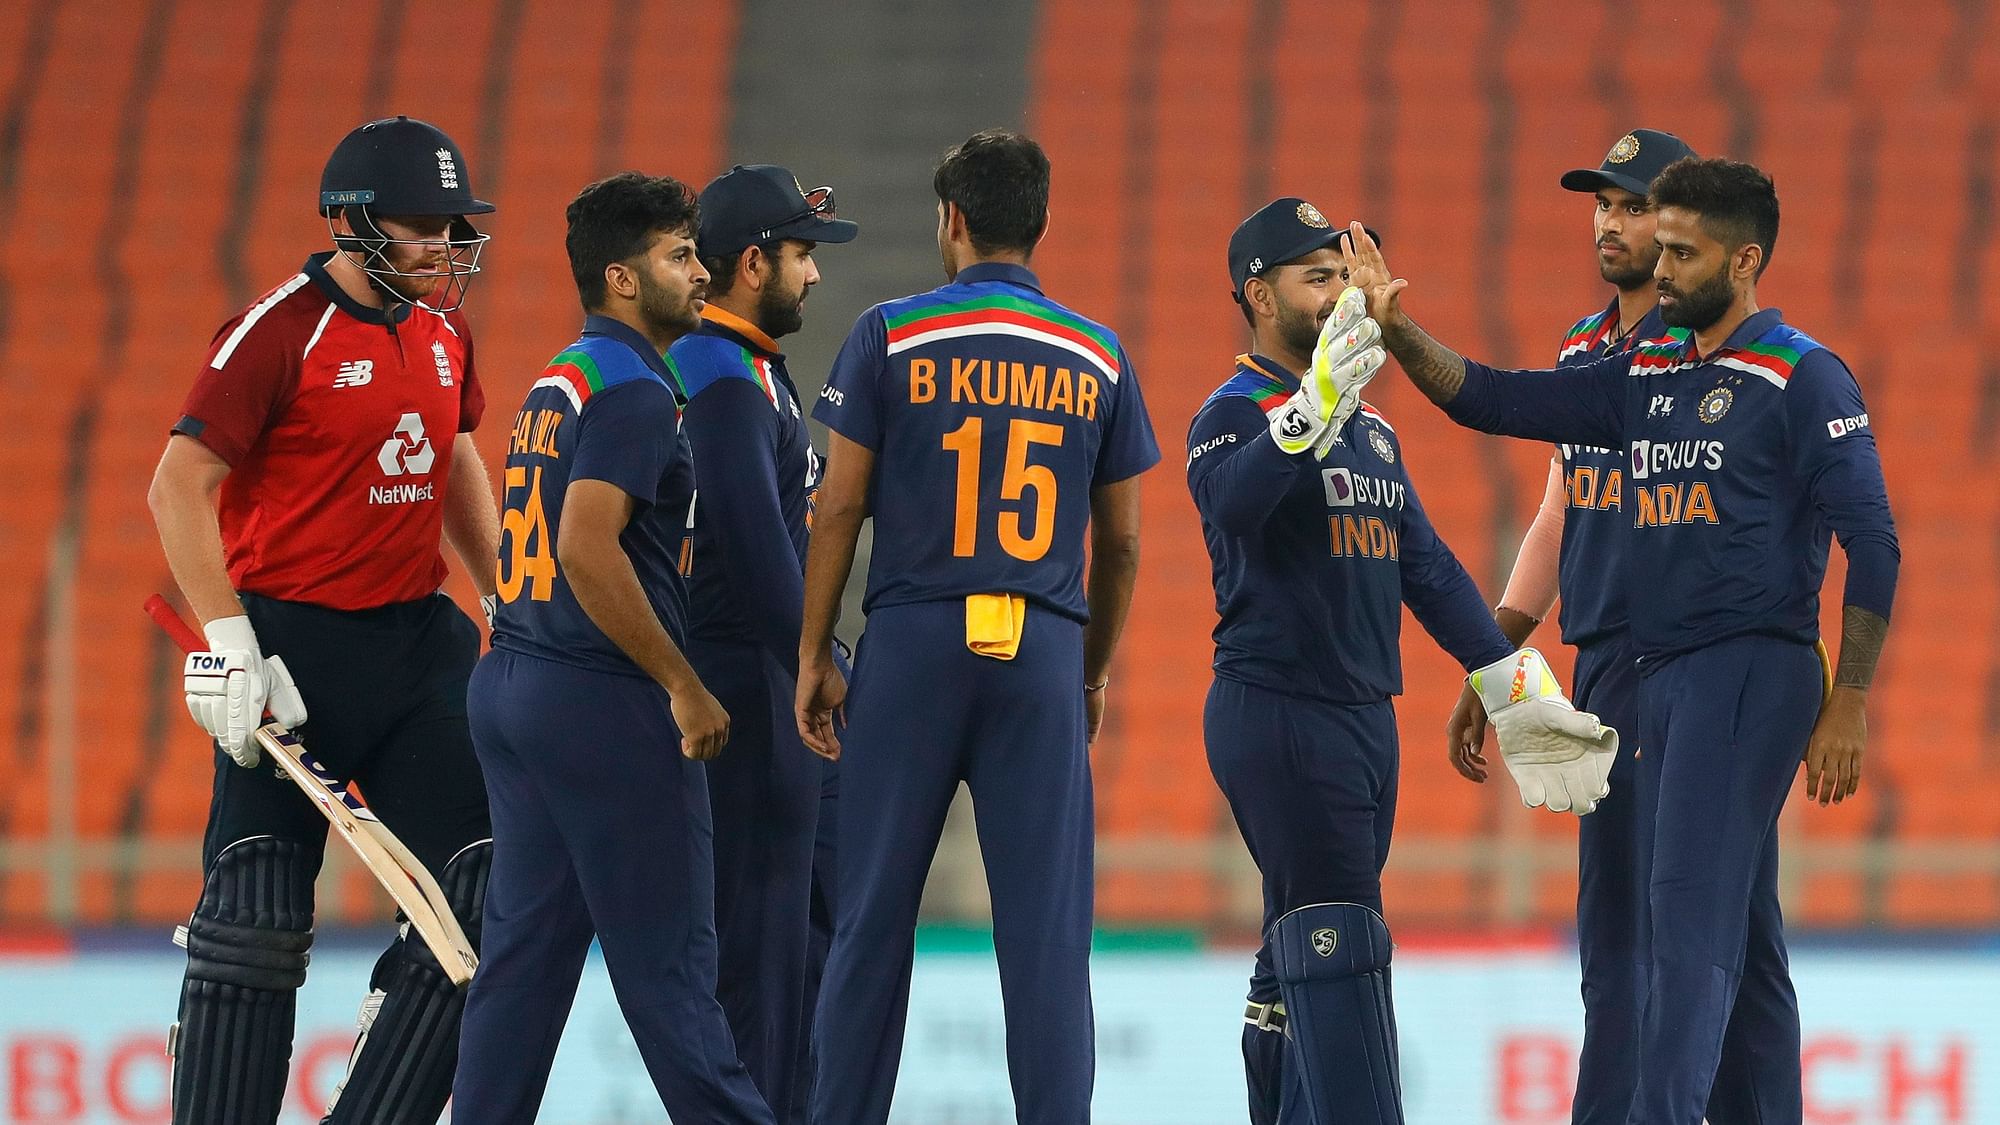 Shardul Thakur of India celebrates the wicket of Jonny Bairstow of England during the 5th T20 International between India and England held at the Narendra Modi Stadium, Ahmedabad, Gujarat, India on the 20th March 2021